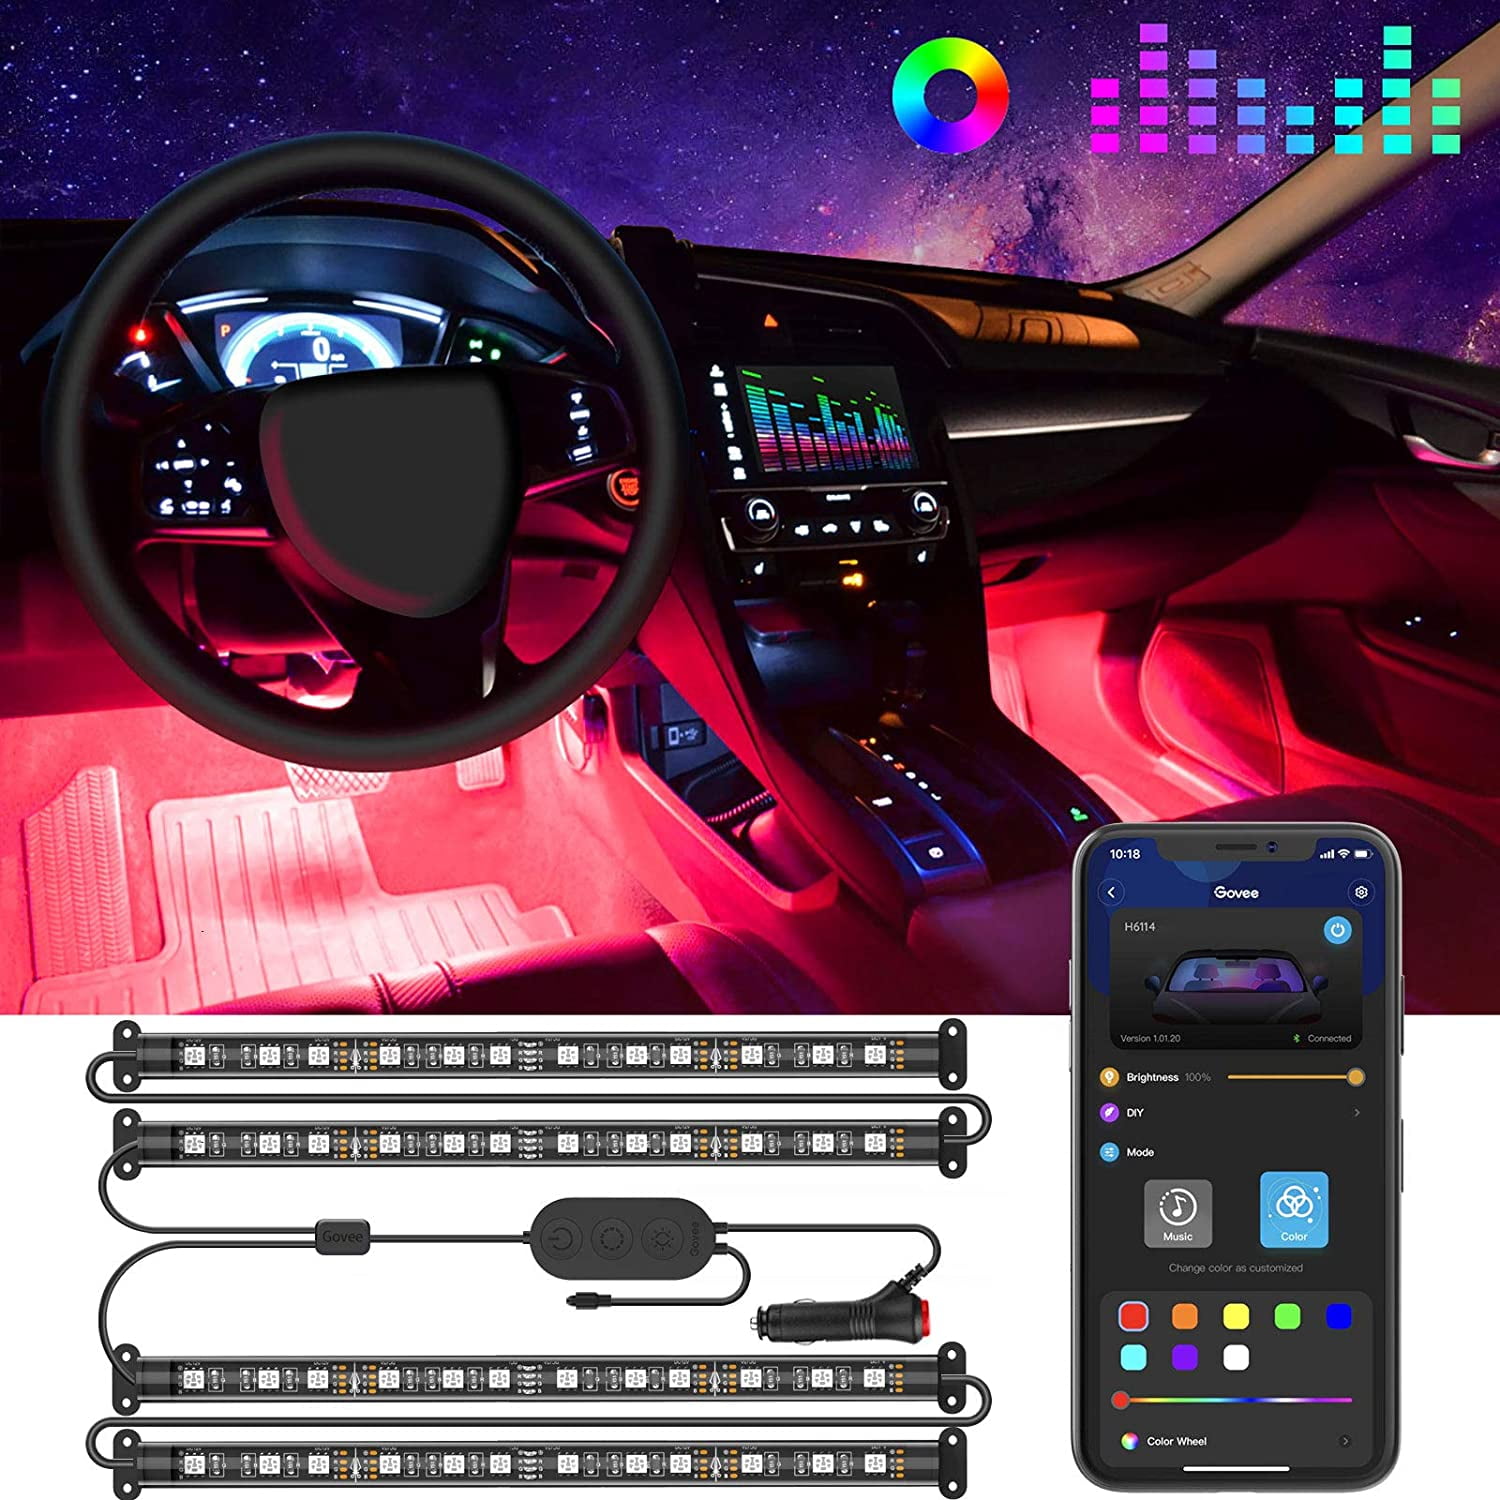 DC 12V Chanwen Interior Car Lights with Remote and Control Box,Upgraded 2-in-1 Design Interior Car LED Lights with 12 Colors,48 LEDs Lighting Kit Sync to Music with Super Length Wires for Various Car 